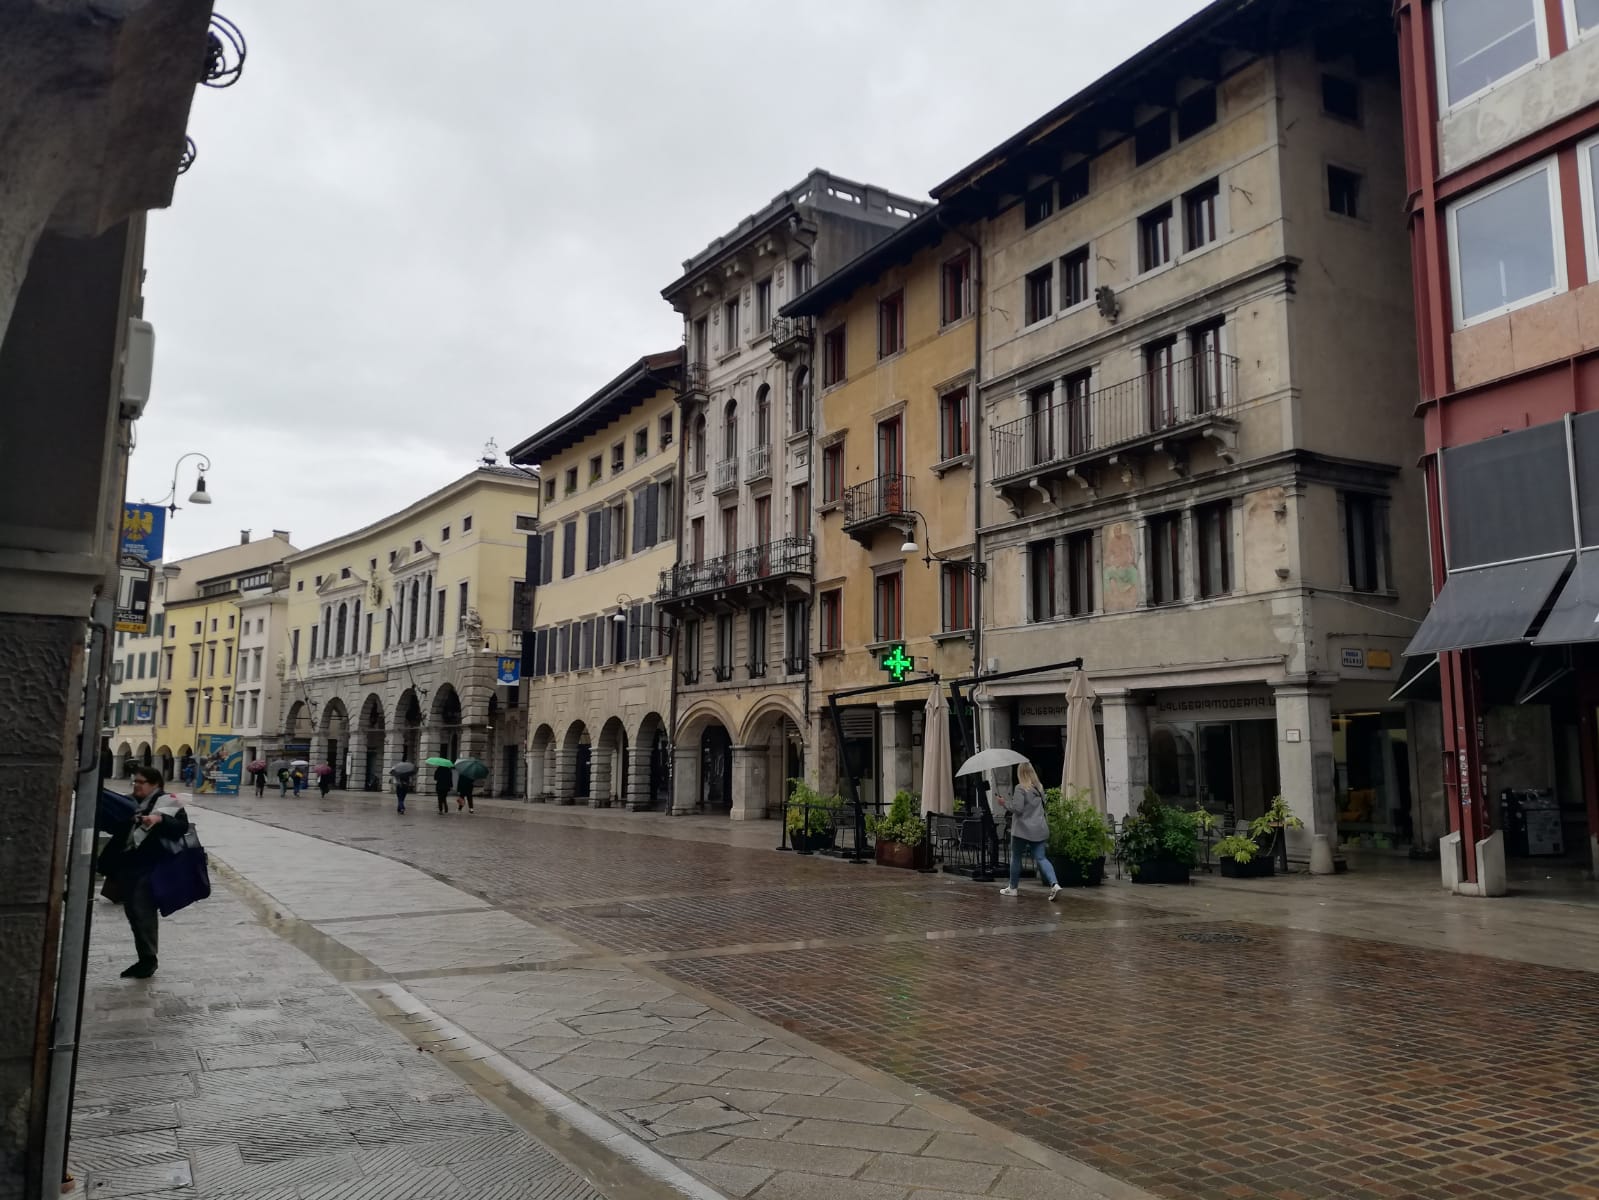 Via Mercato Vecchio in Udine where historic palaces and porches show decorations and frescos - for Lacuna interview with Firoza Wahedi